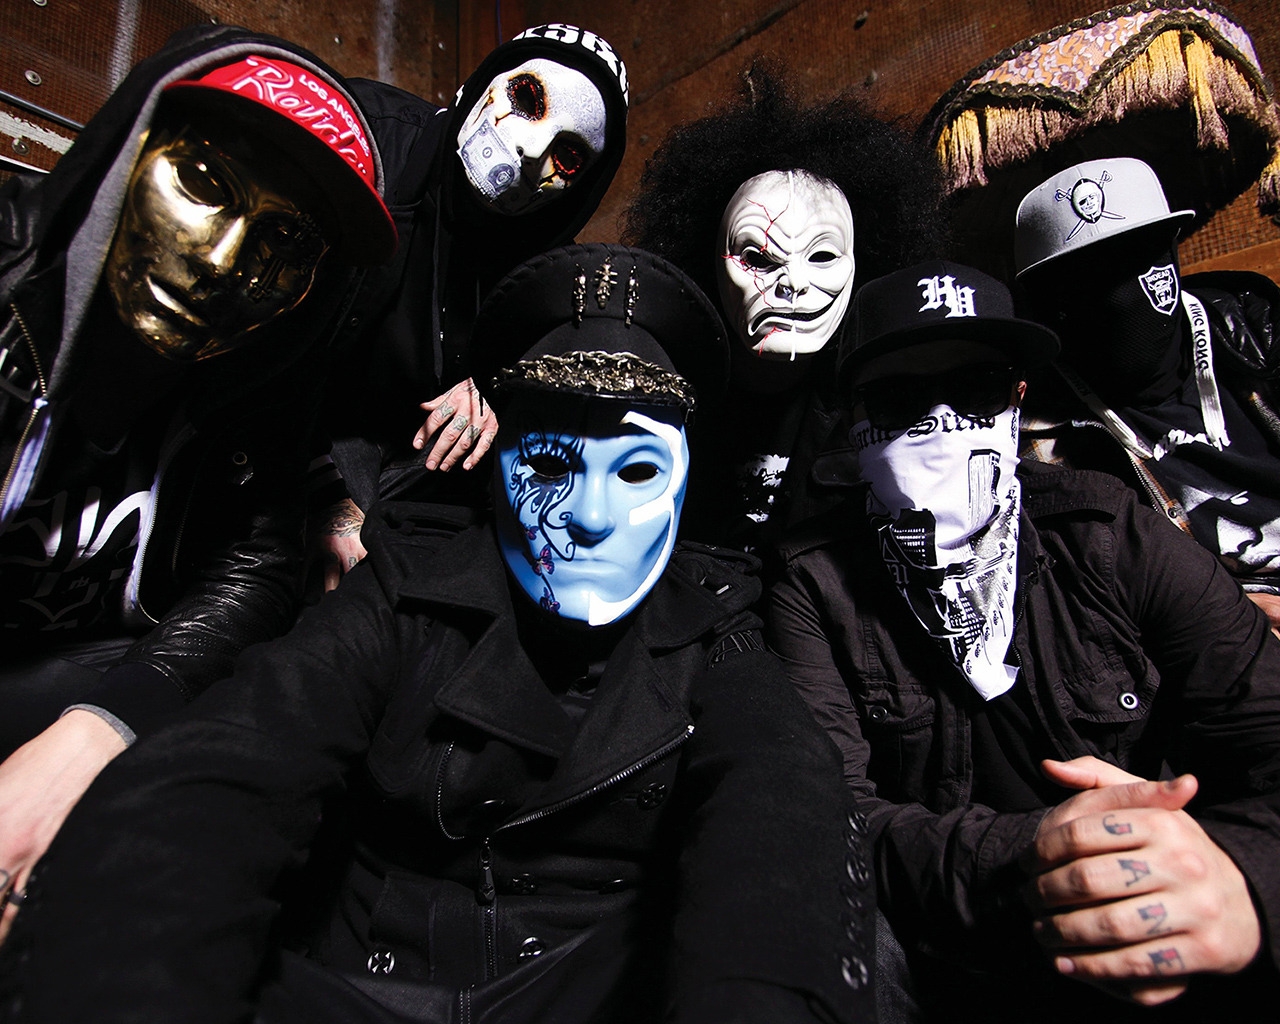 Hollywood Undead for 1280 x 1024 resolution